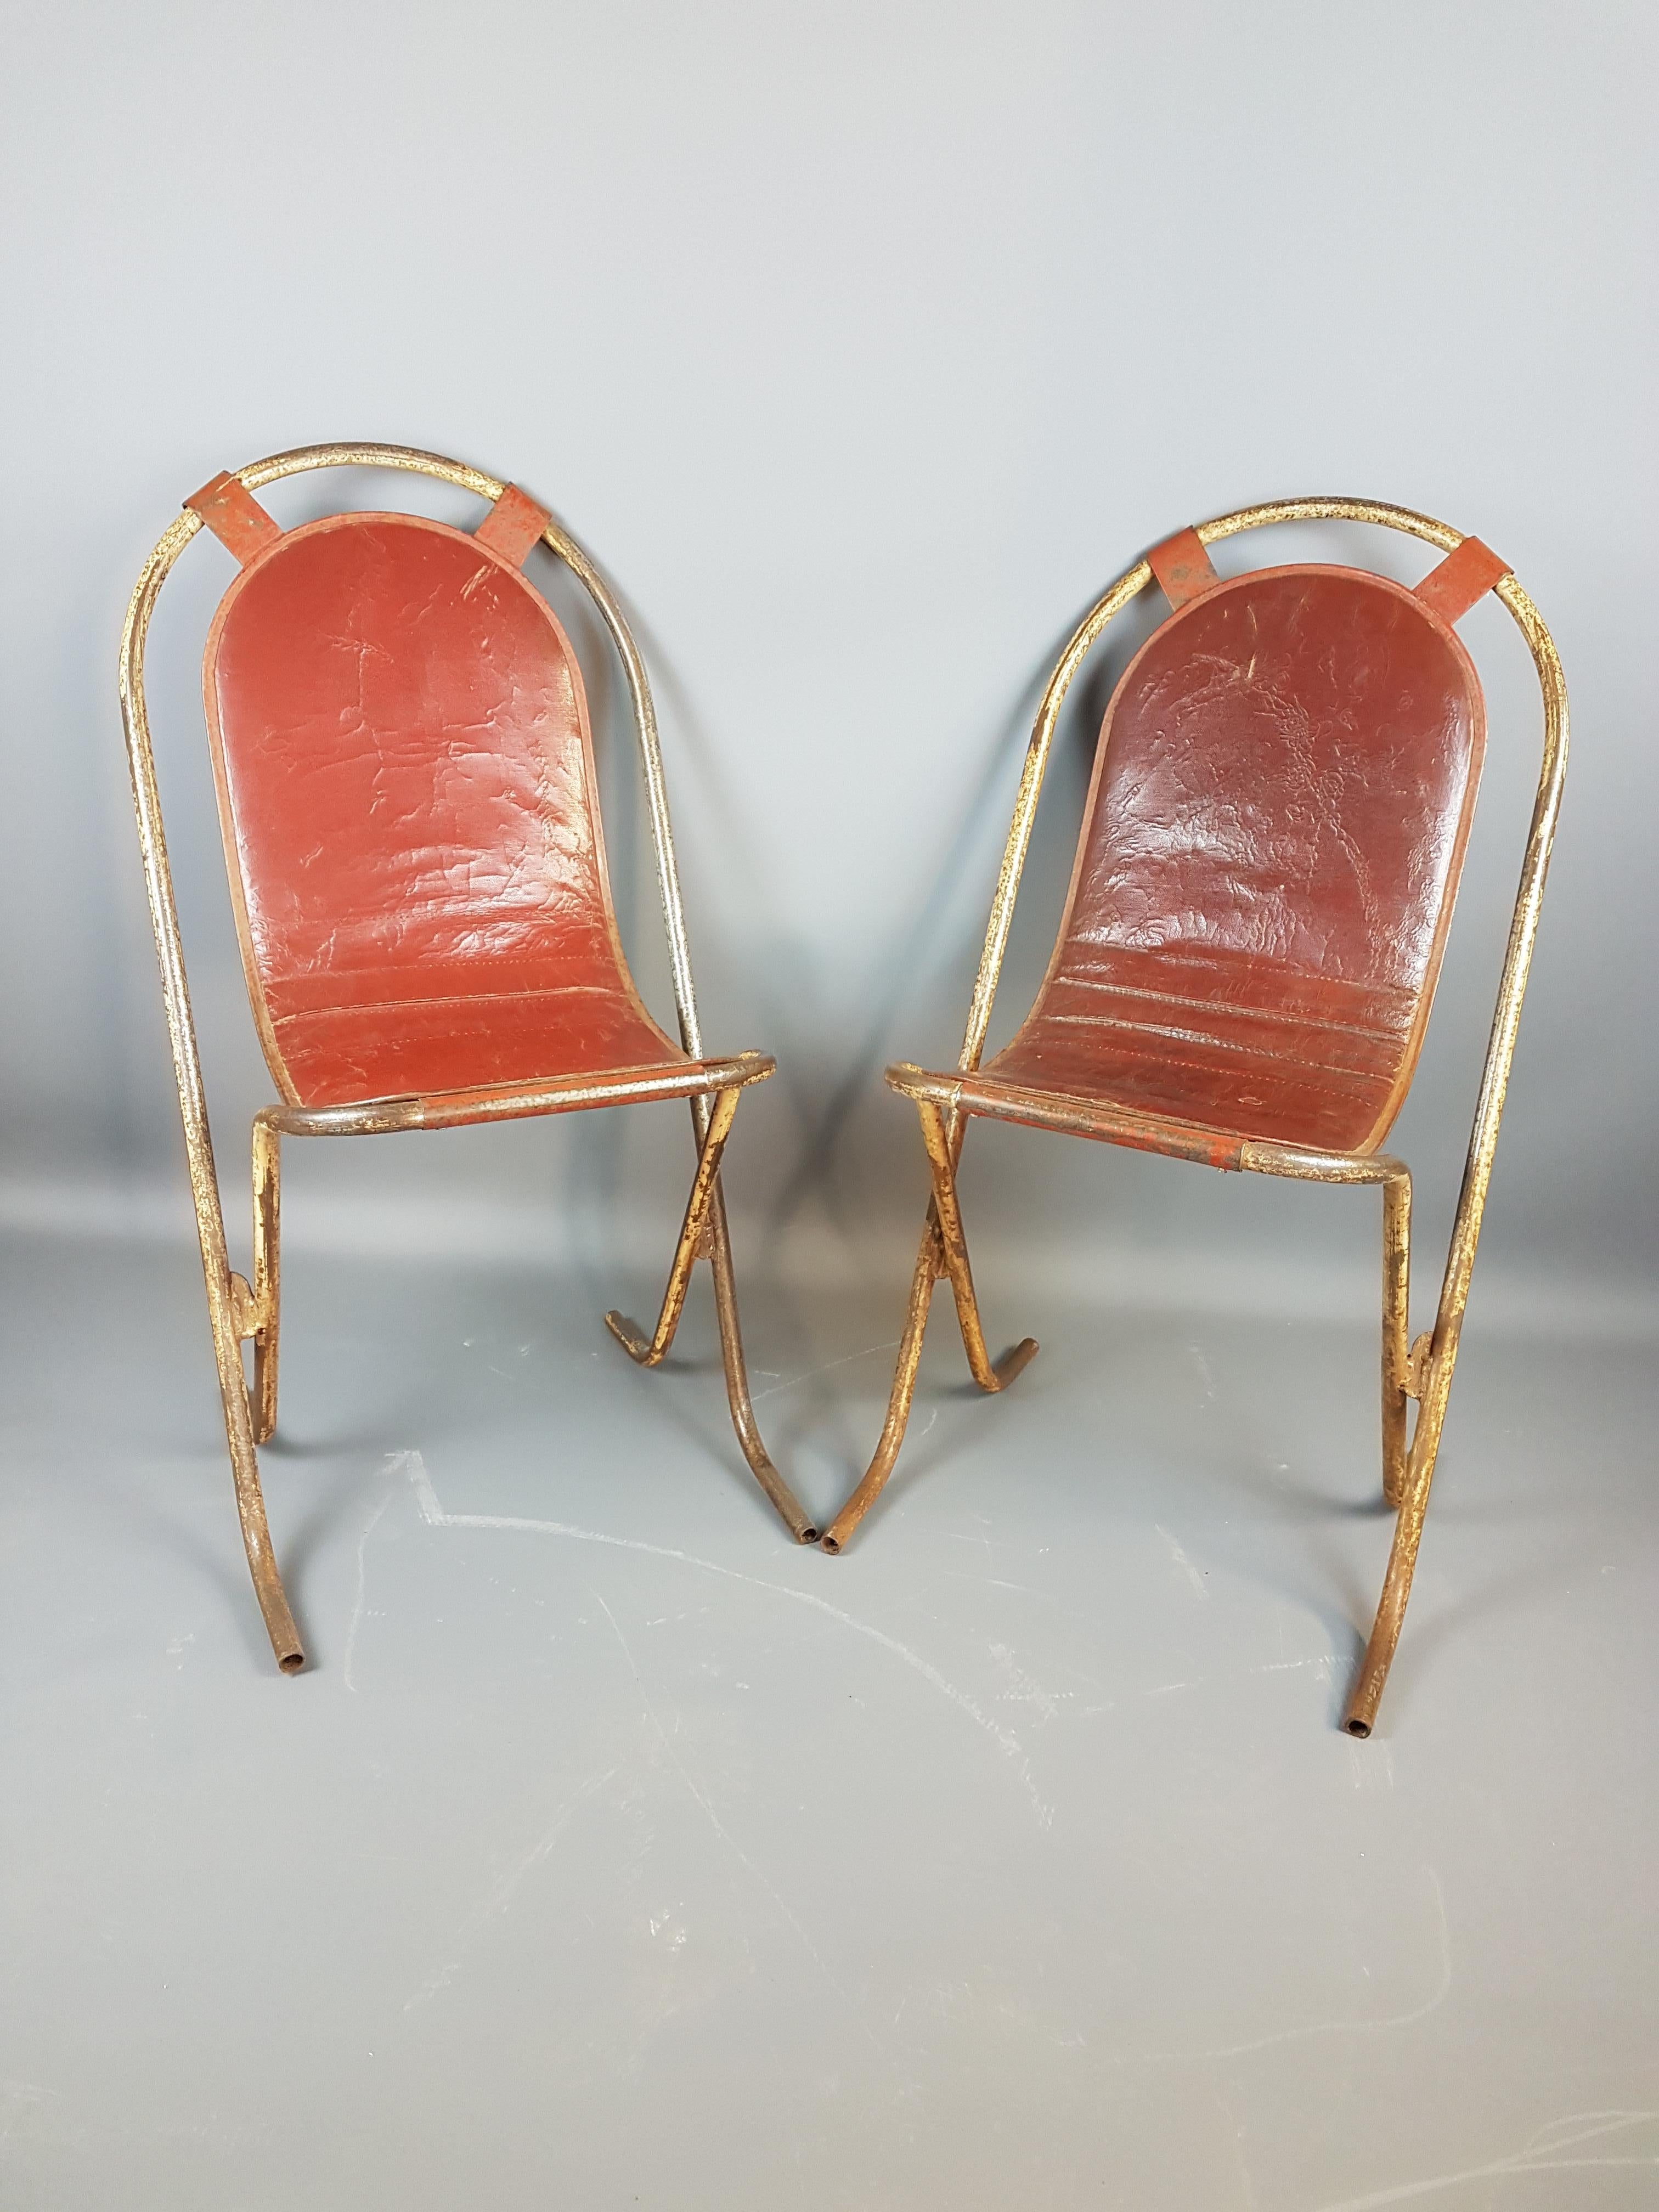 Beautiful pair of English Stak-a-Bye metal chairs by Sebel, England. With the original red rexine padded seats, the chairs are in their original paint finish with great wear and tear patina of time. These chairs have the most desirable combination